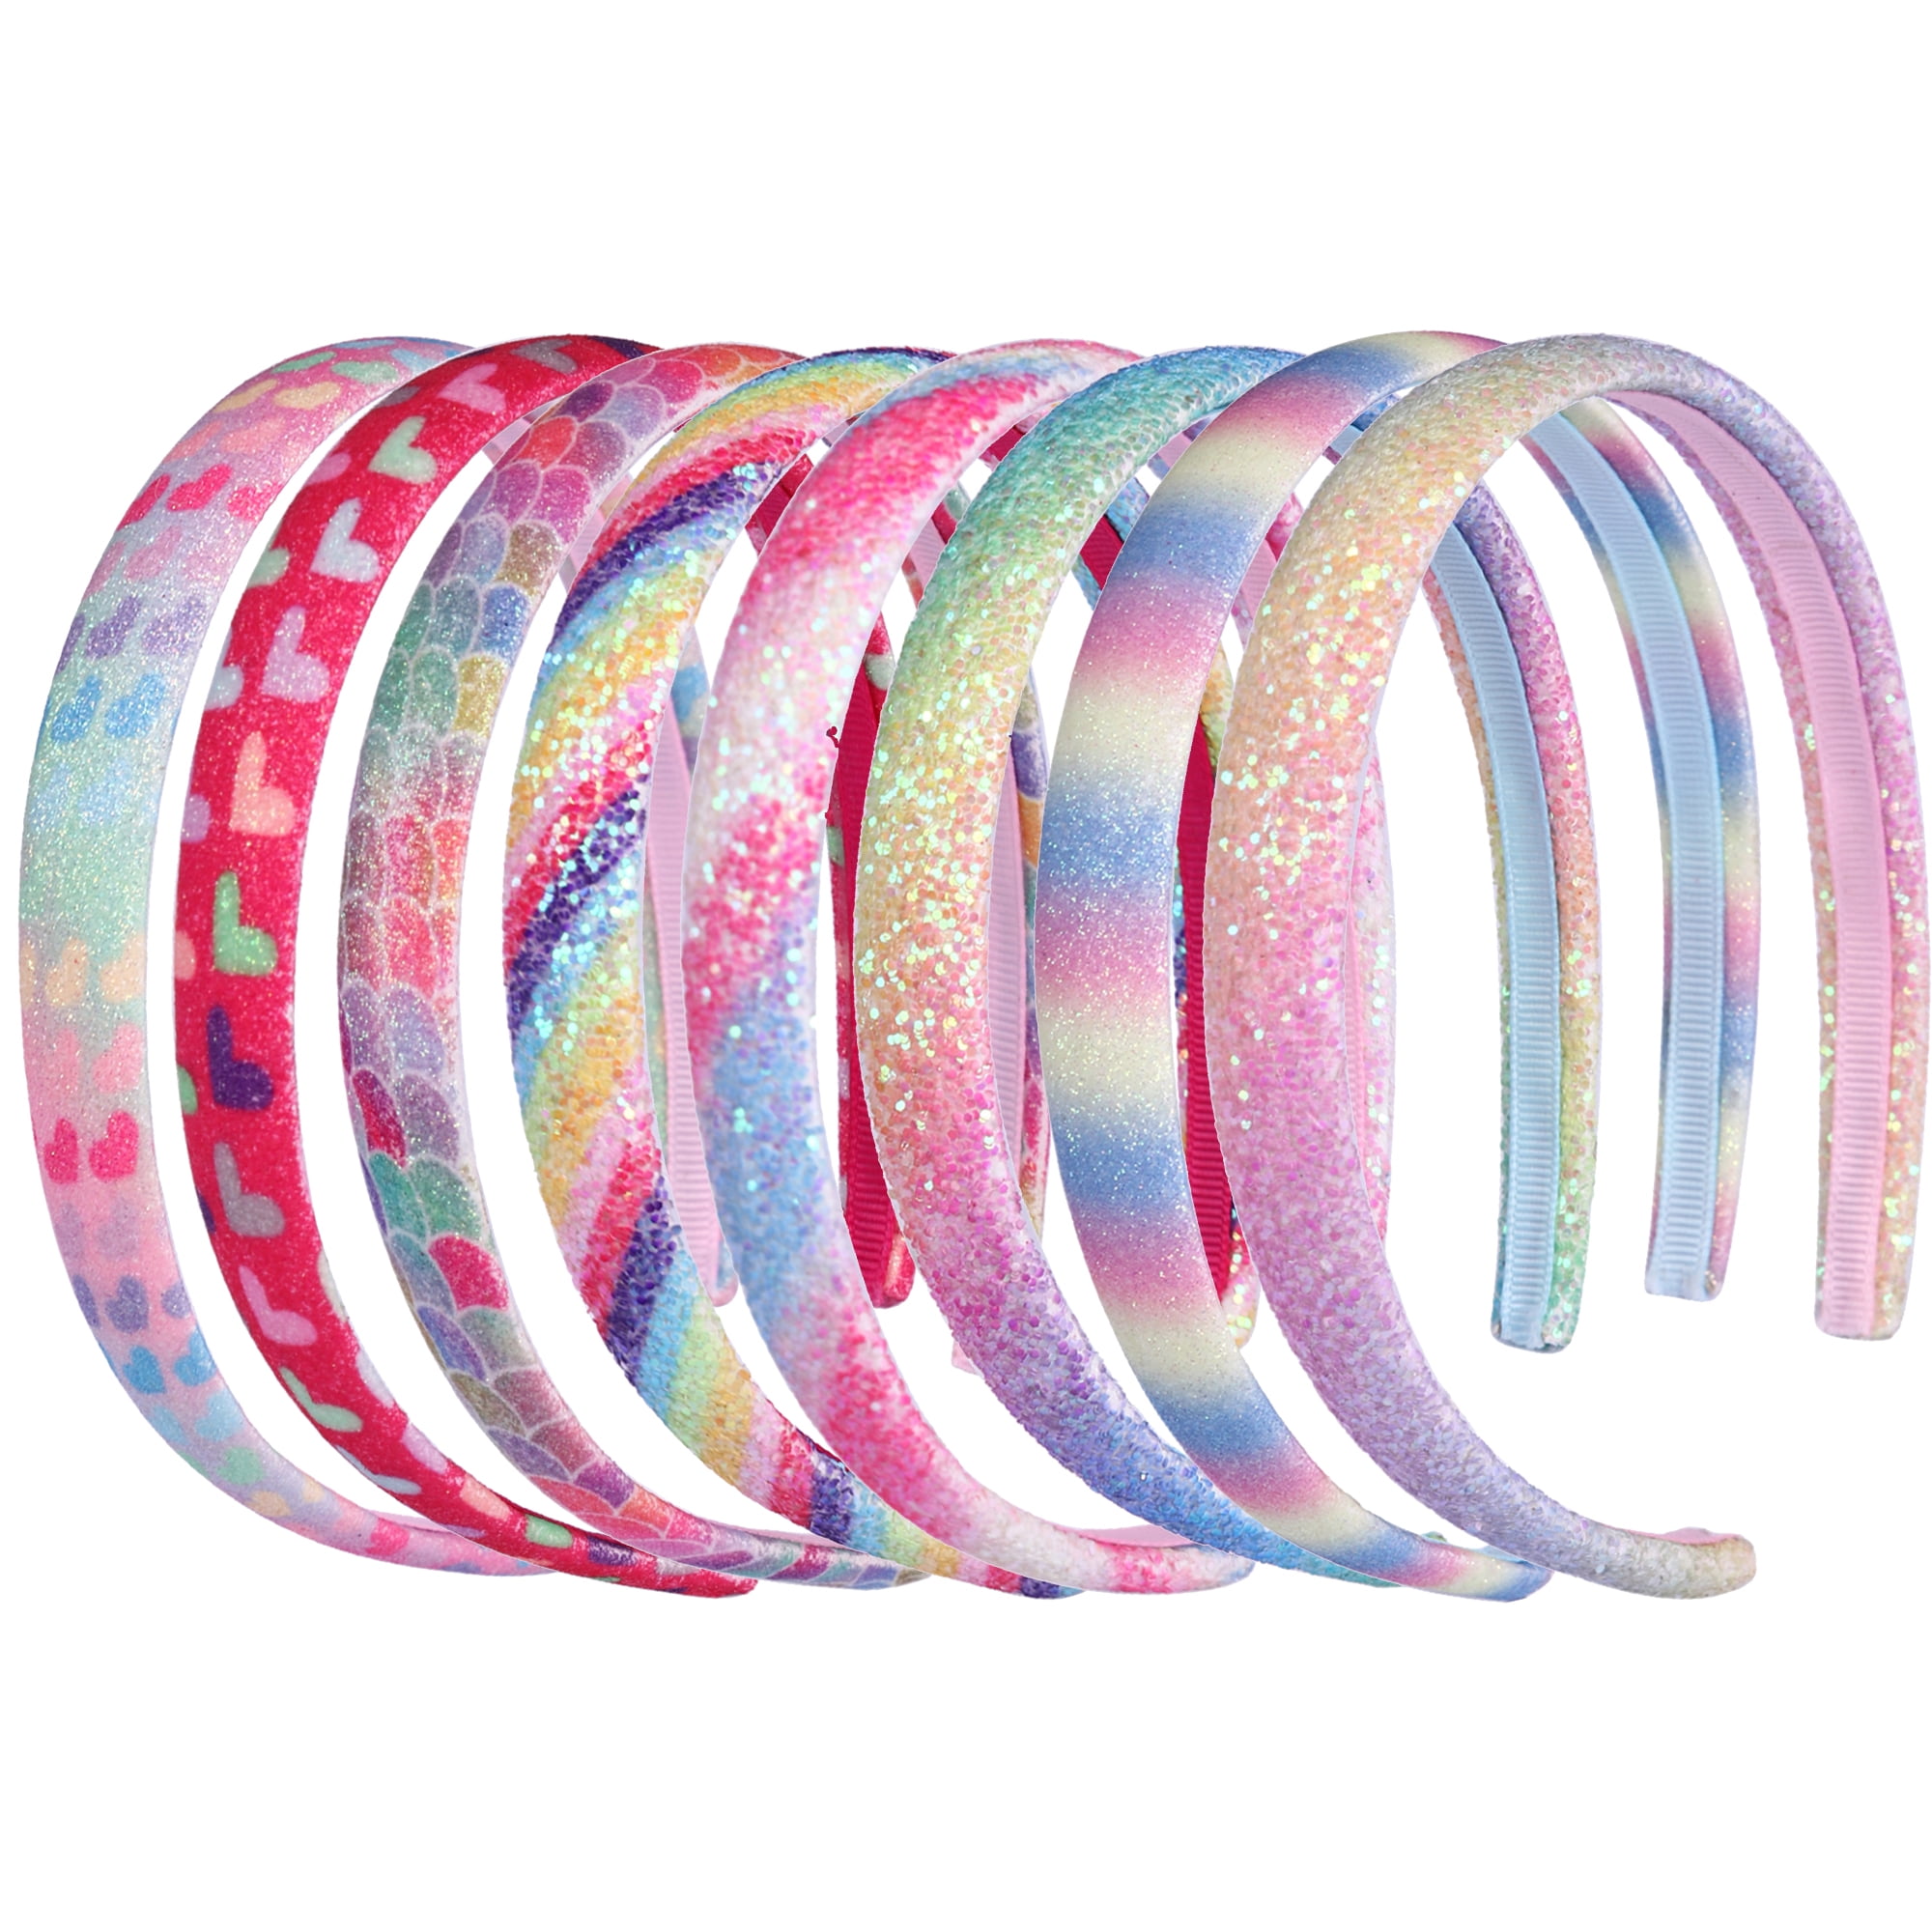 Sparkly clear pink and sparkly clear orange woven rubber band bracelet